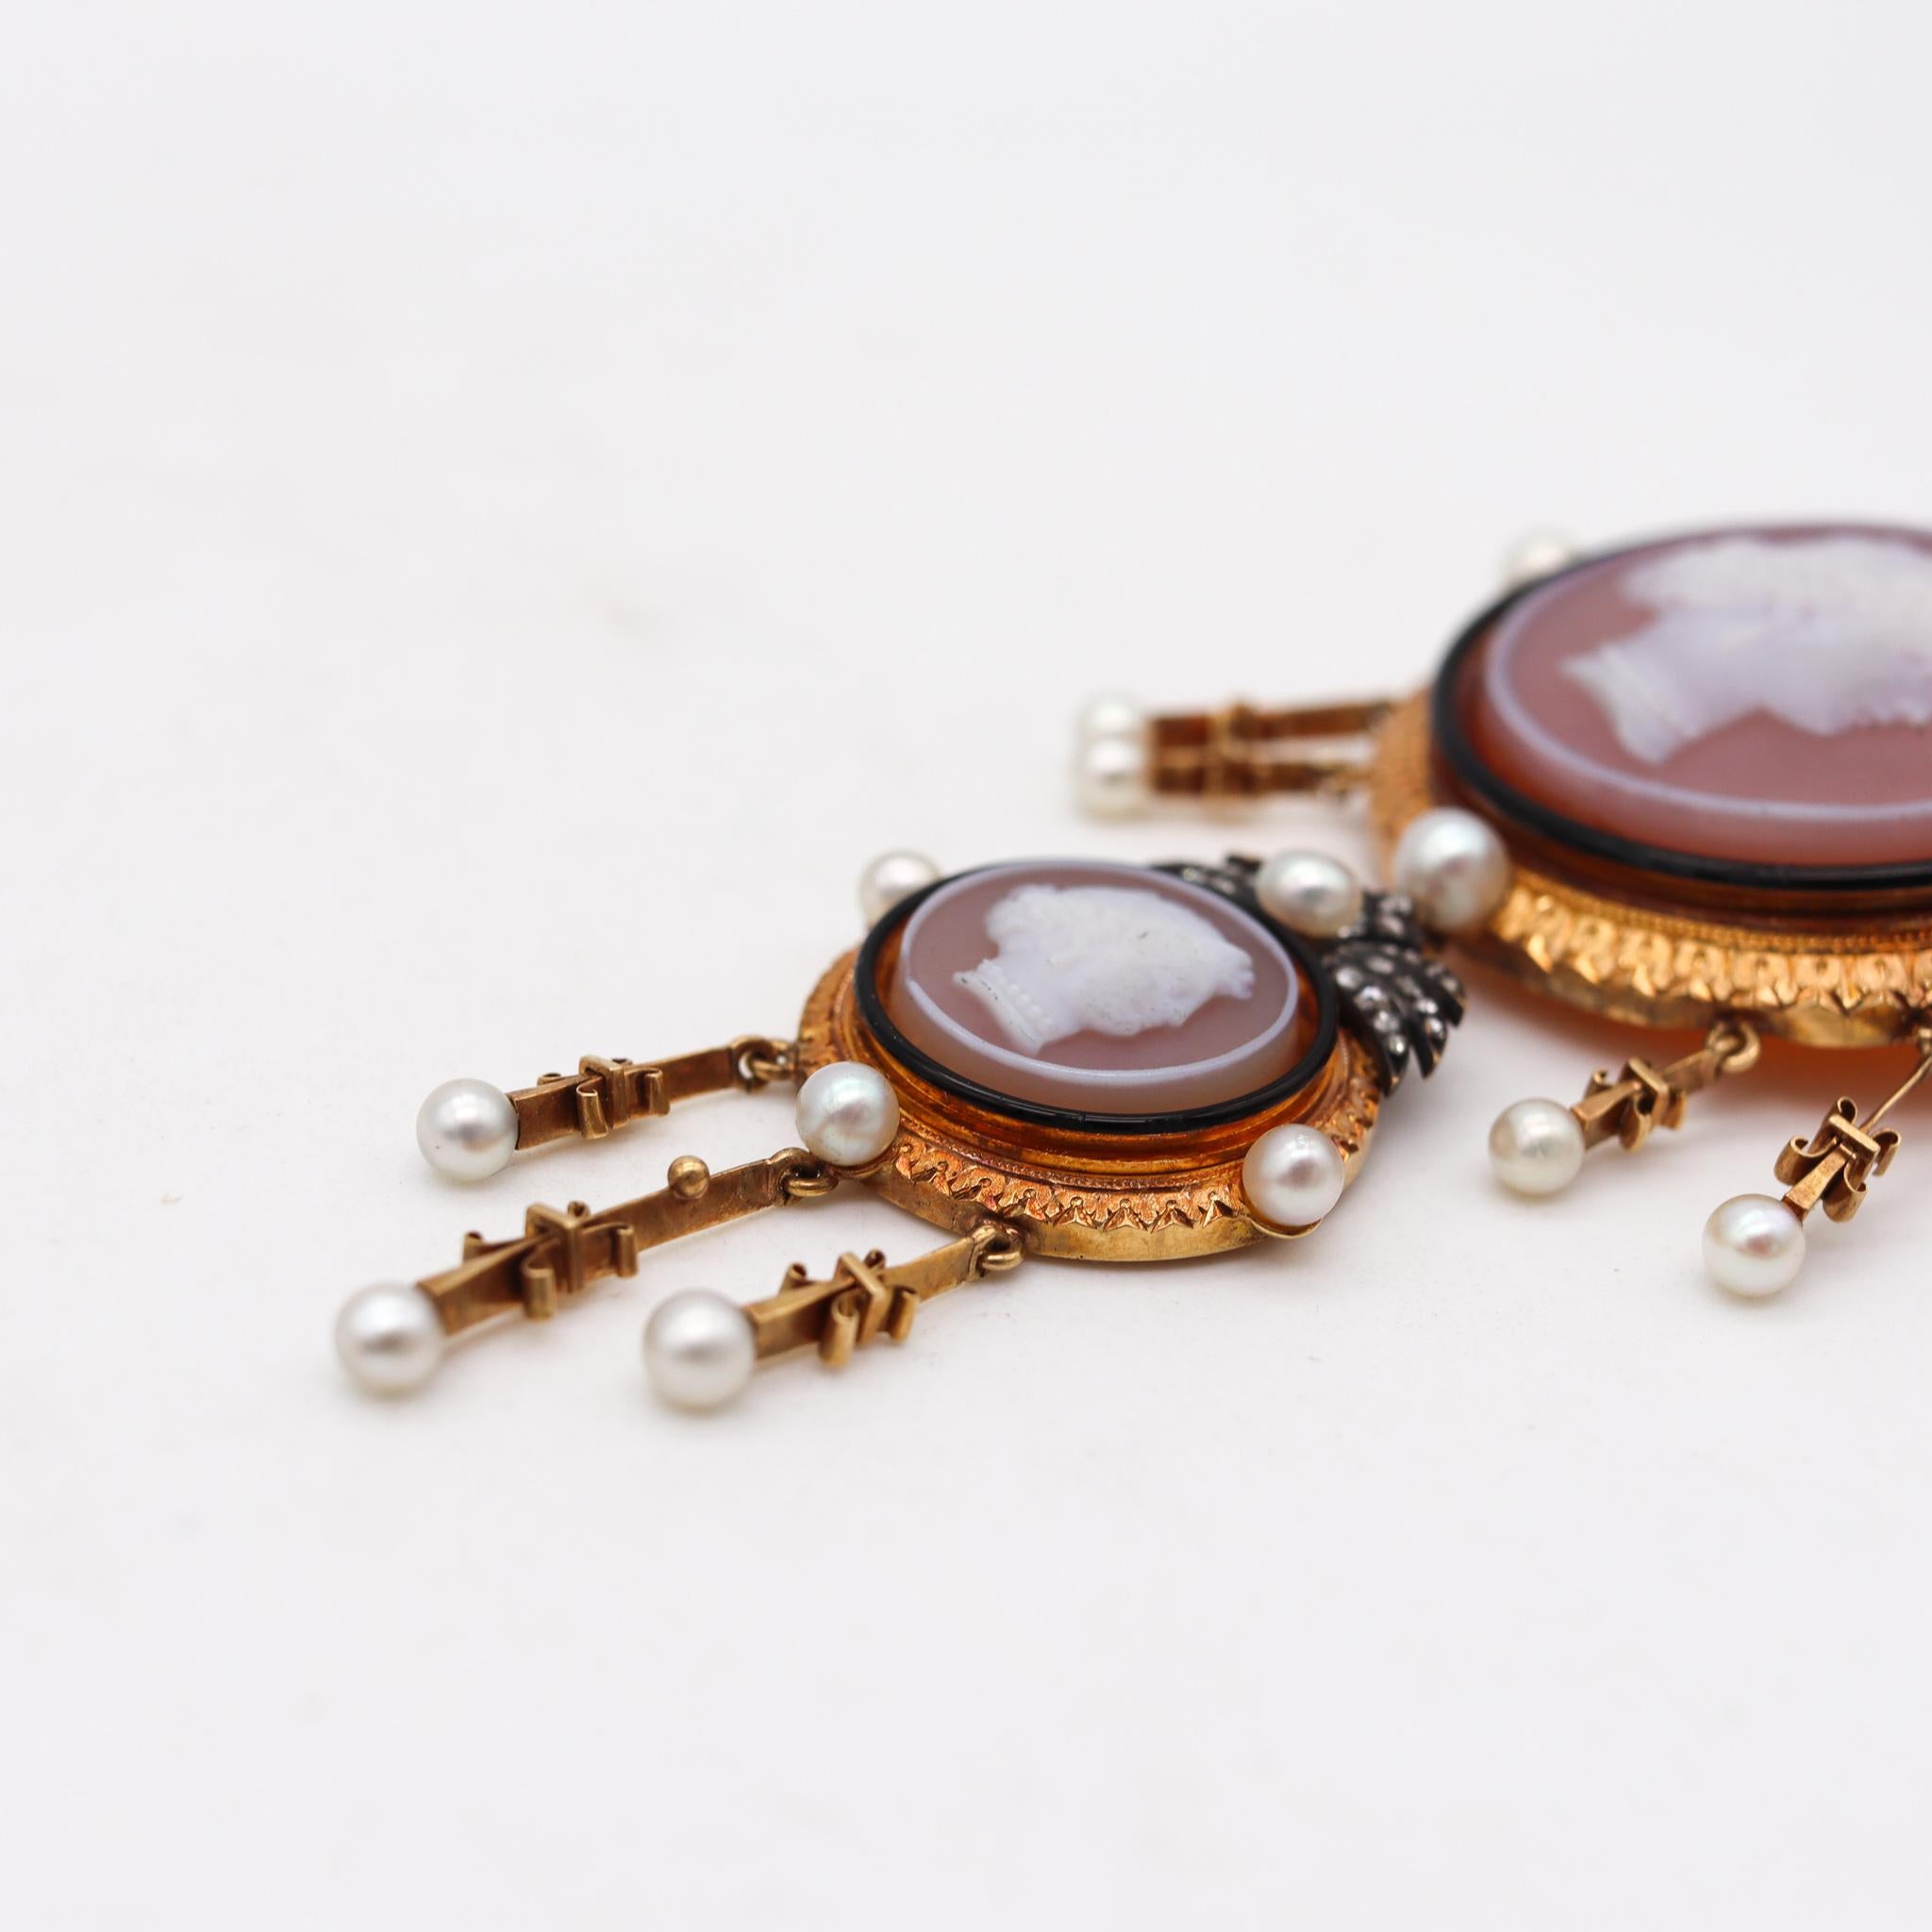 Neoclassical Austria 1870 Vienna Carved Agate Pendant Brooch in 18kt Gold with Natural Pearls For Sale